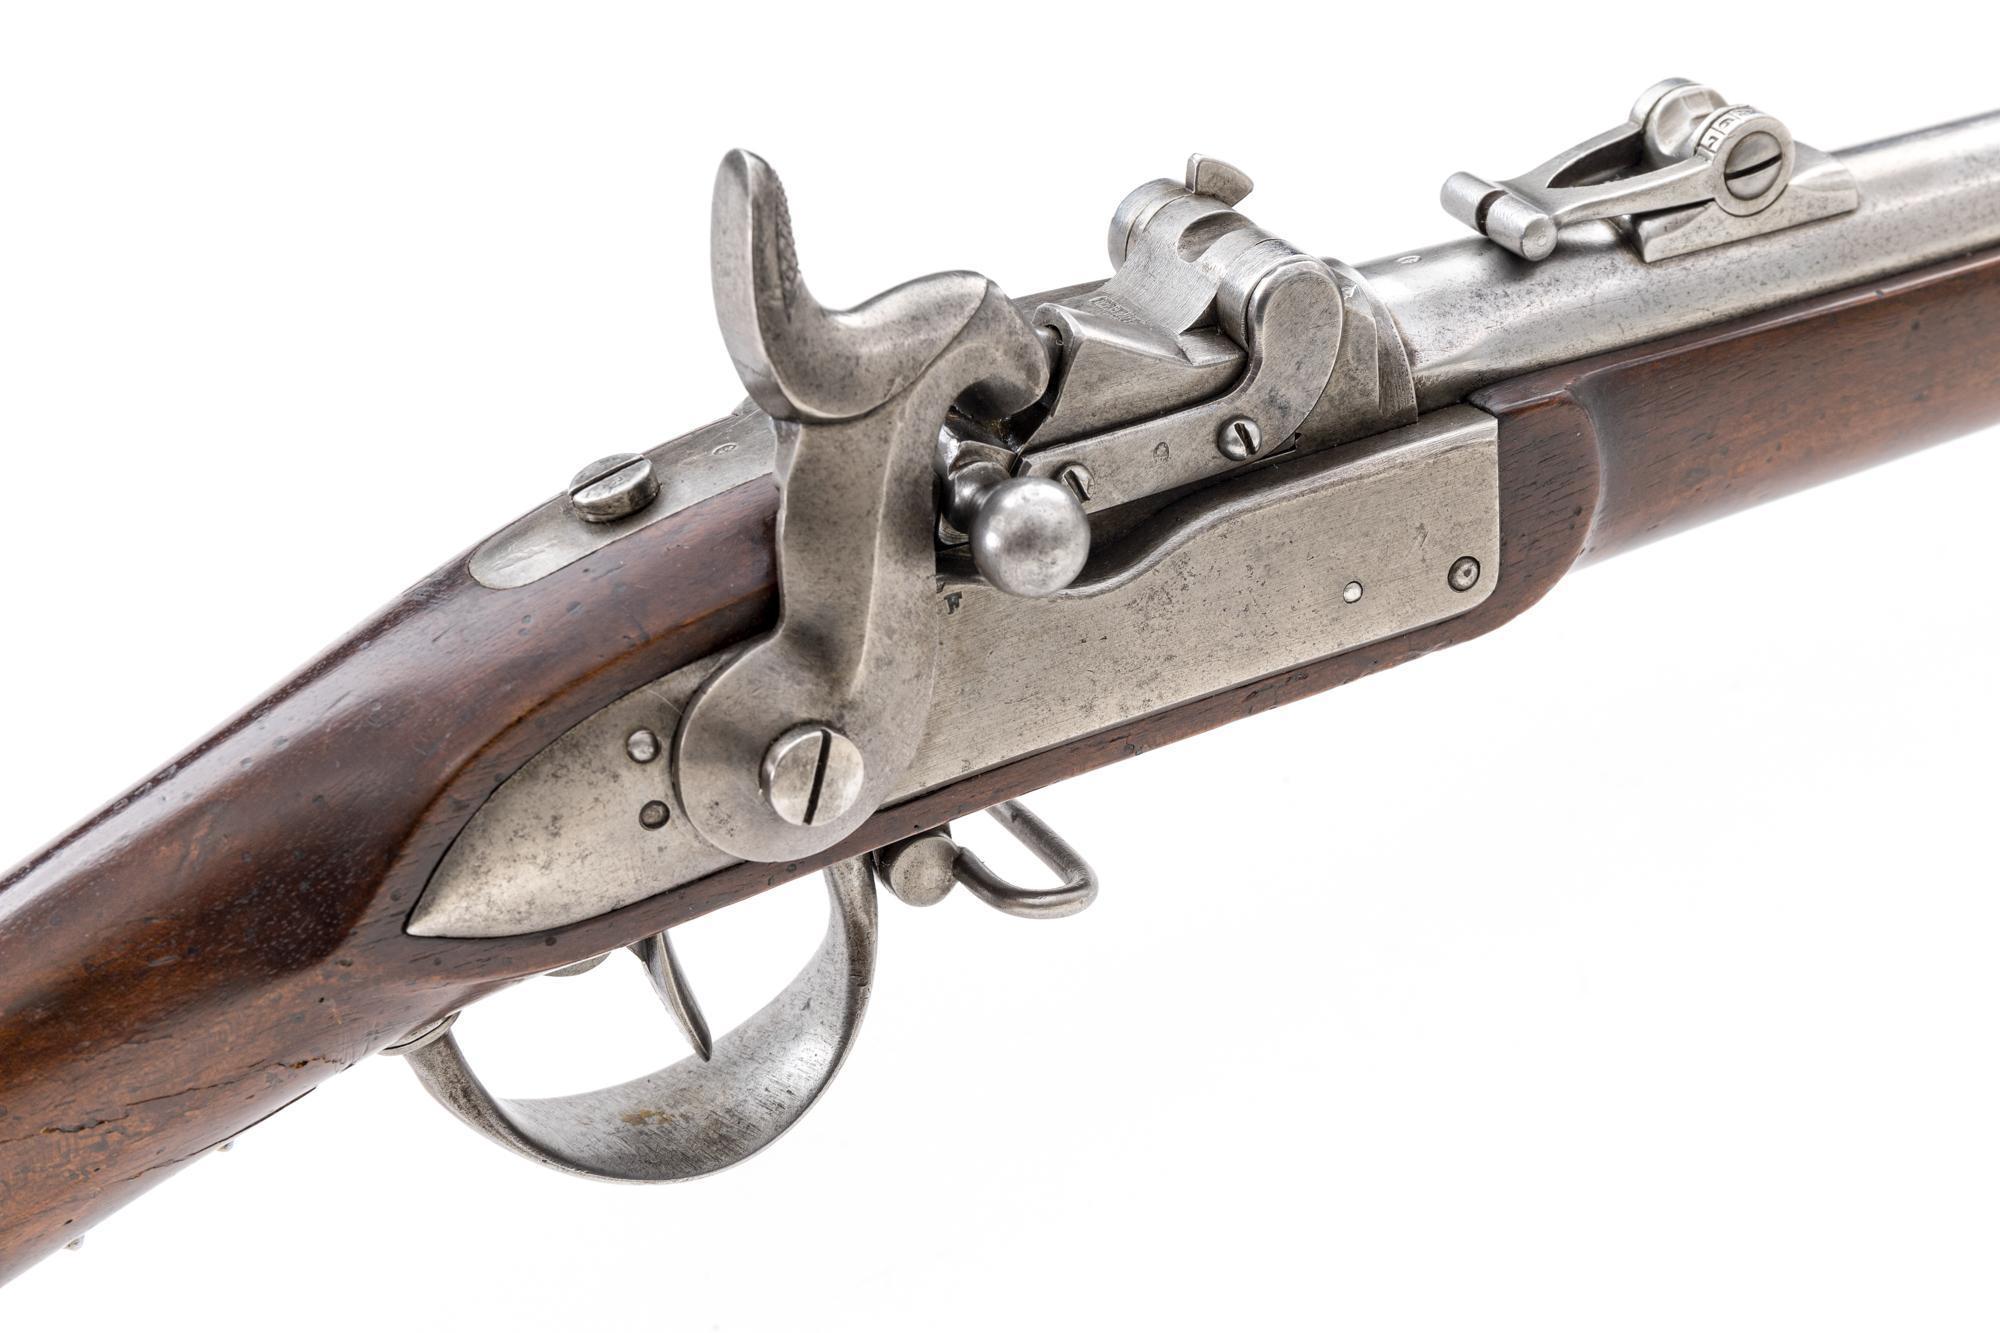 Antique Swiss Model 1842/67 Infantry Rifle, with Milbank-Amsler Metallic Cartridge Alteration